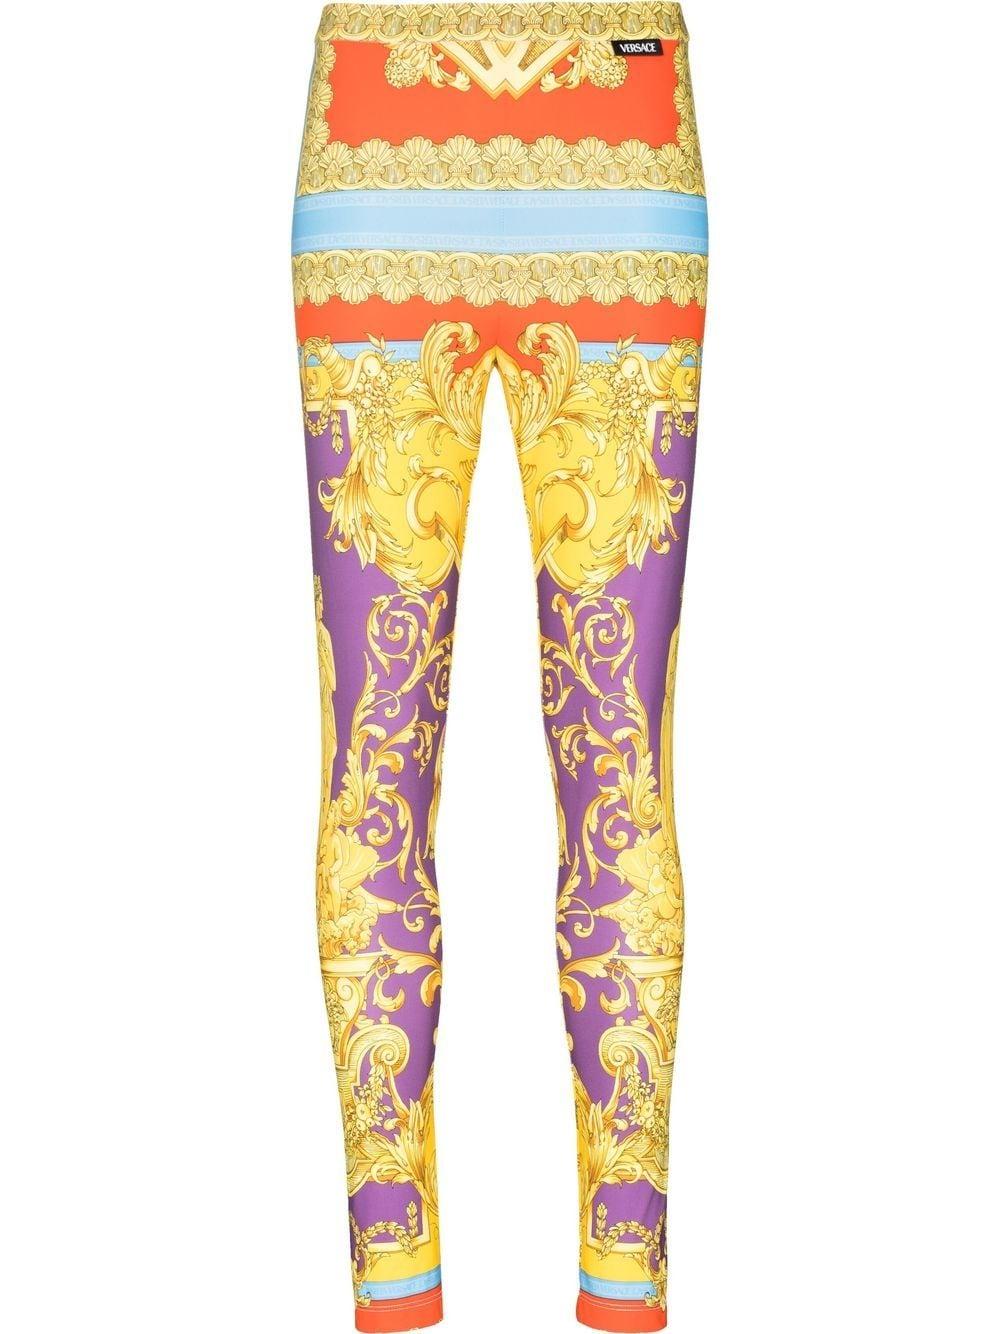 Versace
Medusa Renaissance print leggings
A colourful take on Versace's signature Greek-inspired motif, the Medusa Renaissance is present throughout the house's SS22 collection, as shown by these colourful leggings that sit high at the waist for an